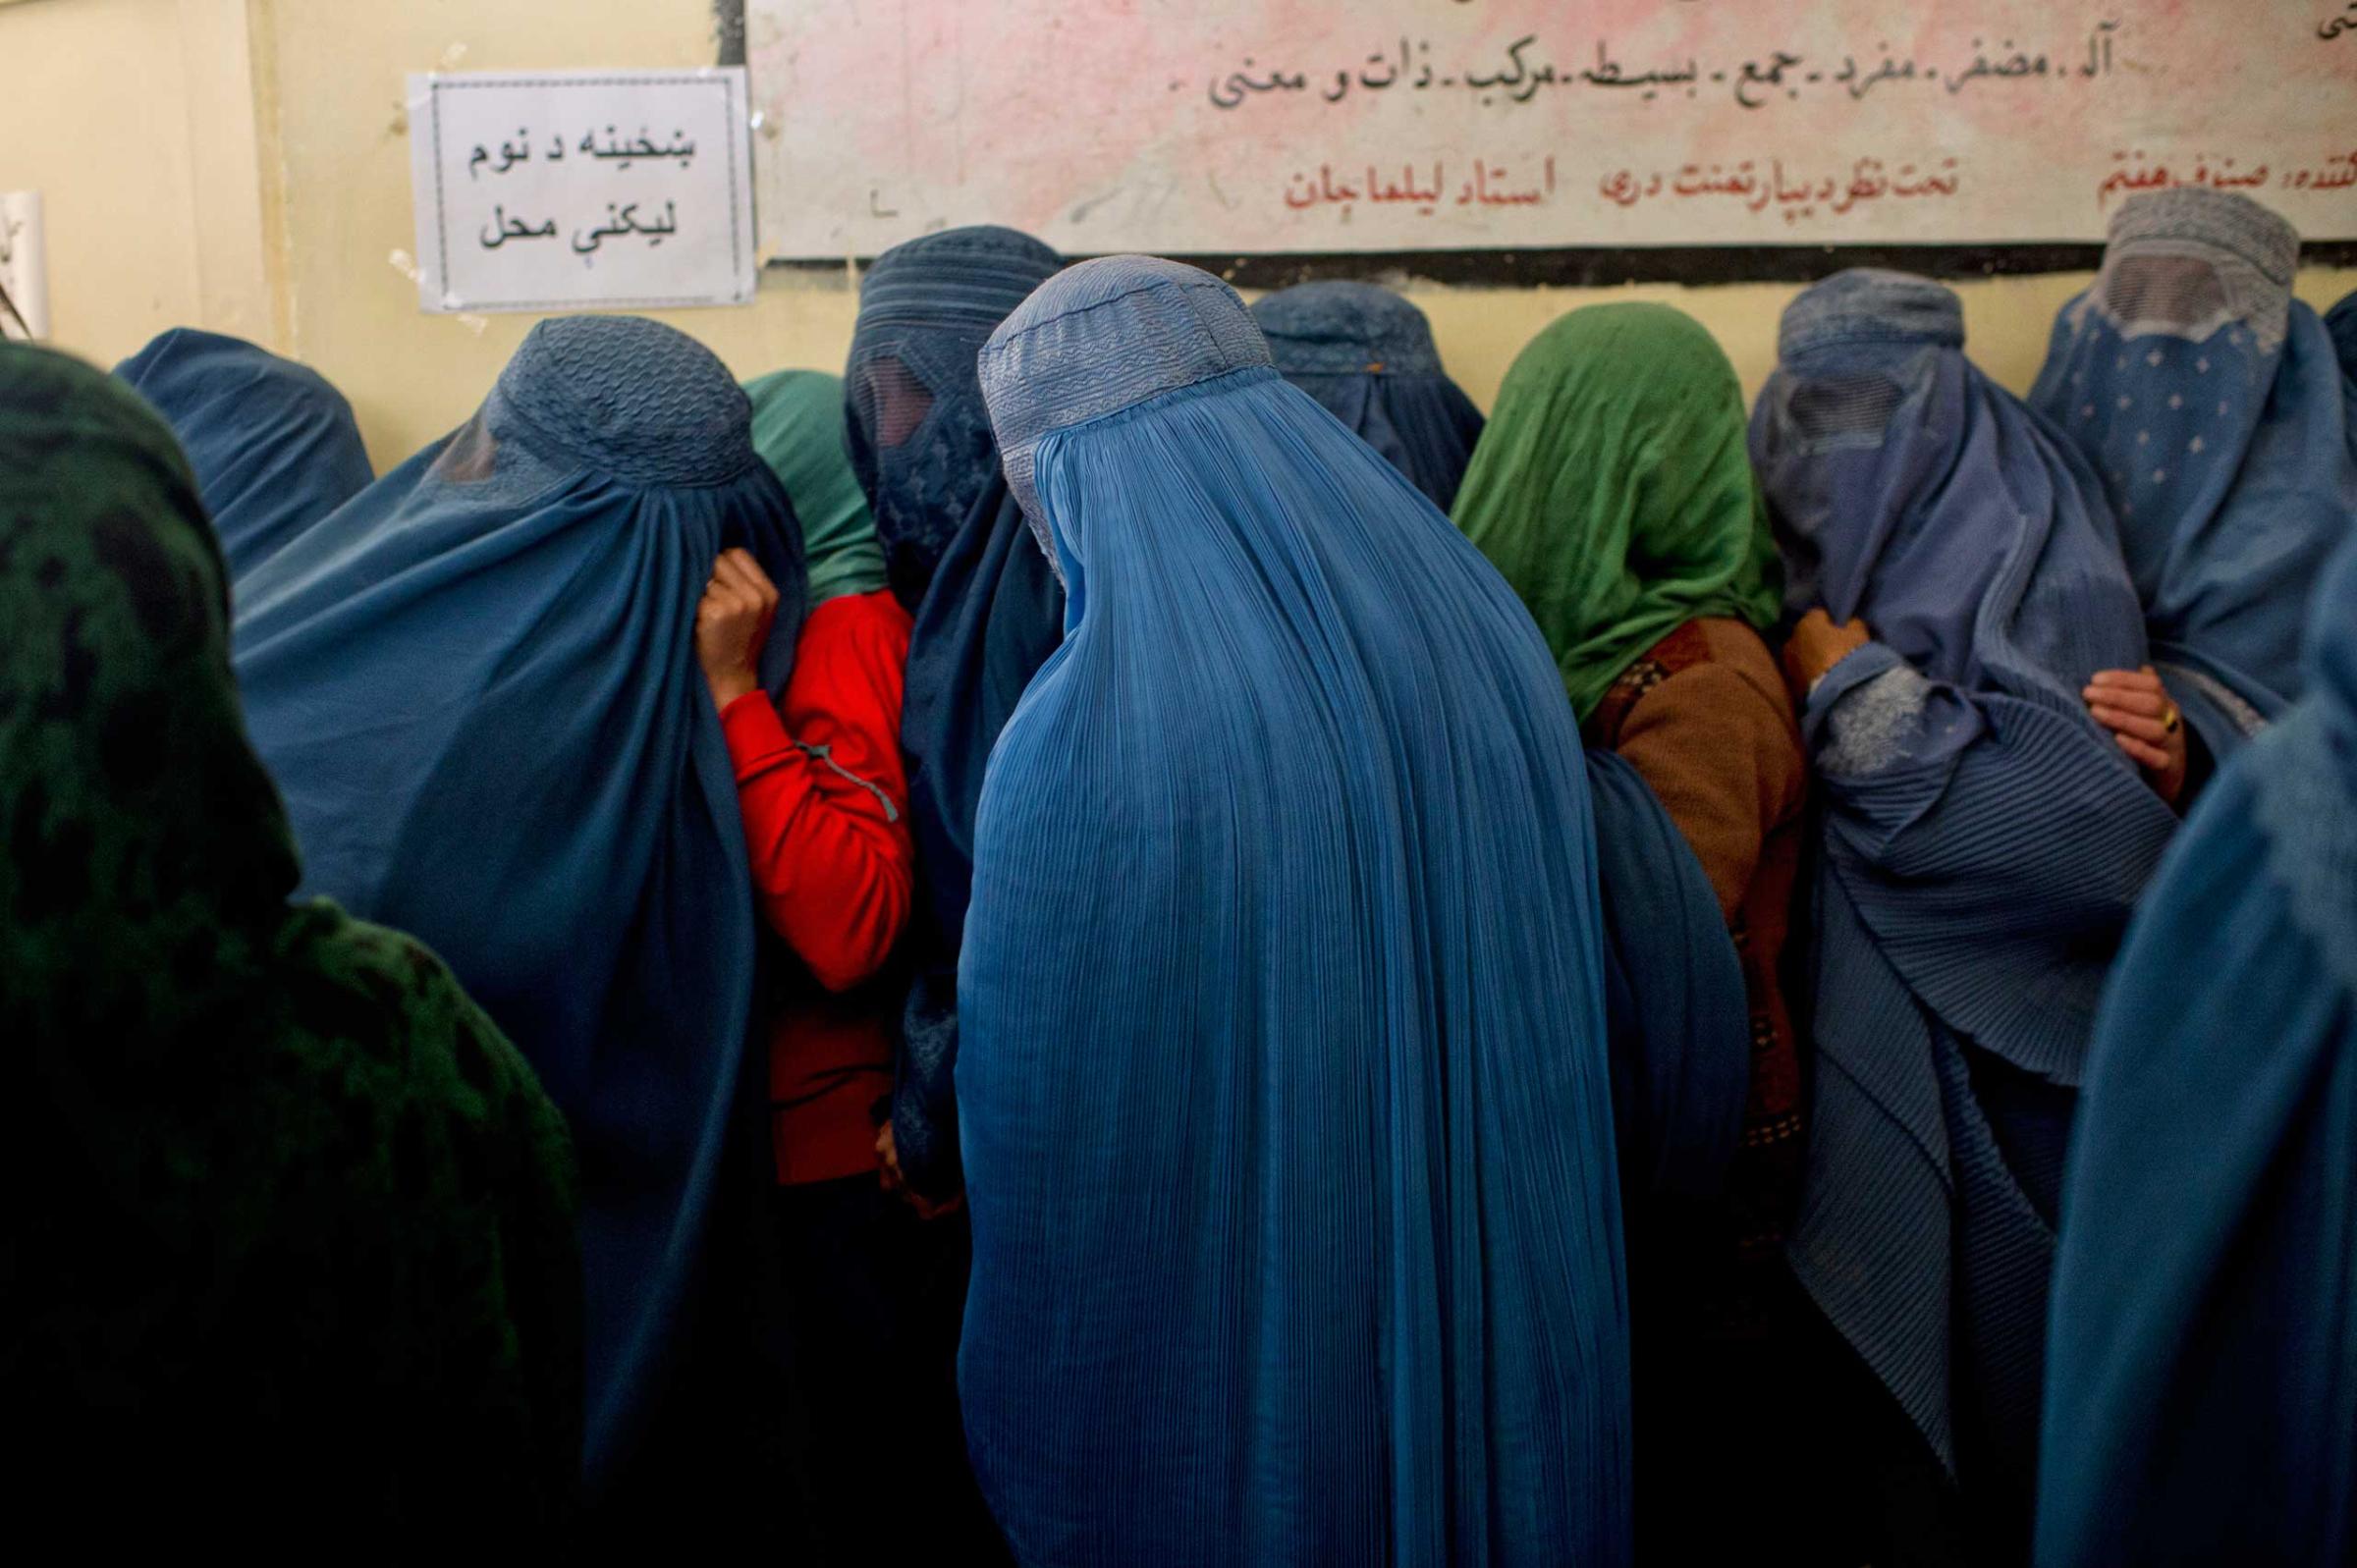 Afghans line up to register to vote for Presidential elections at a center run by the Afghan Independent Electoral Commission in Shah Shaheed, Kabul, Afghanistan, March 25, 2014.